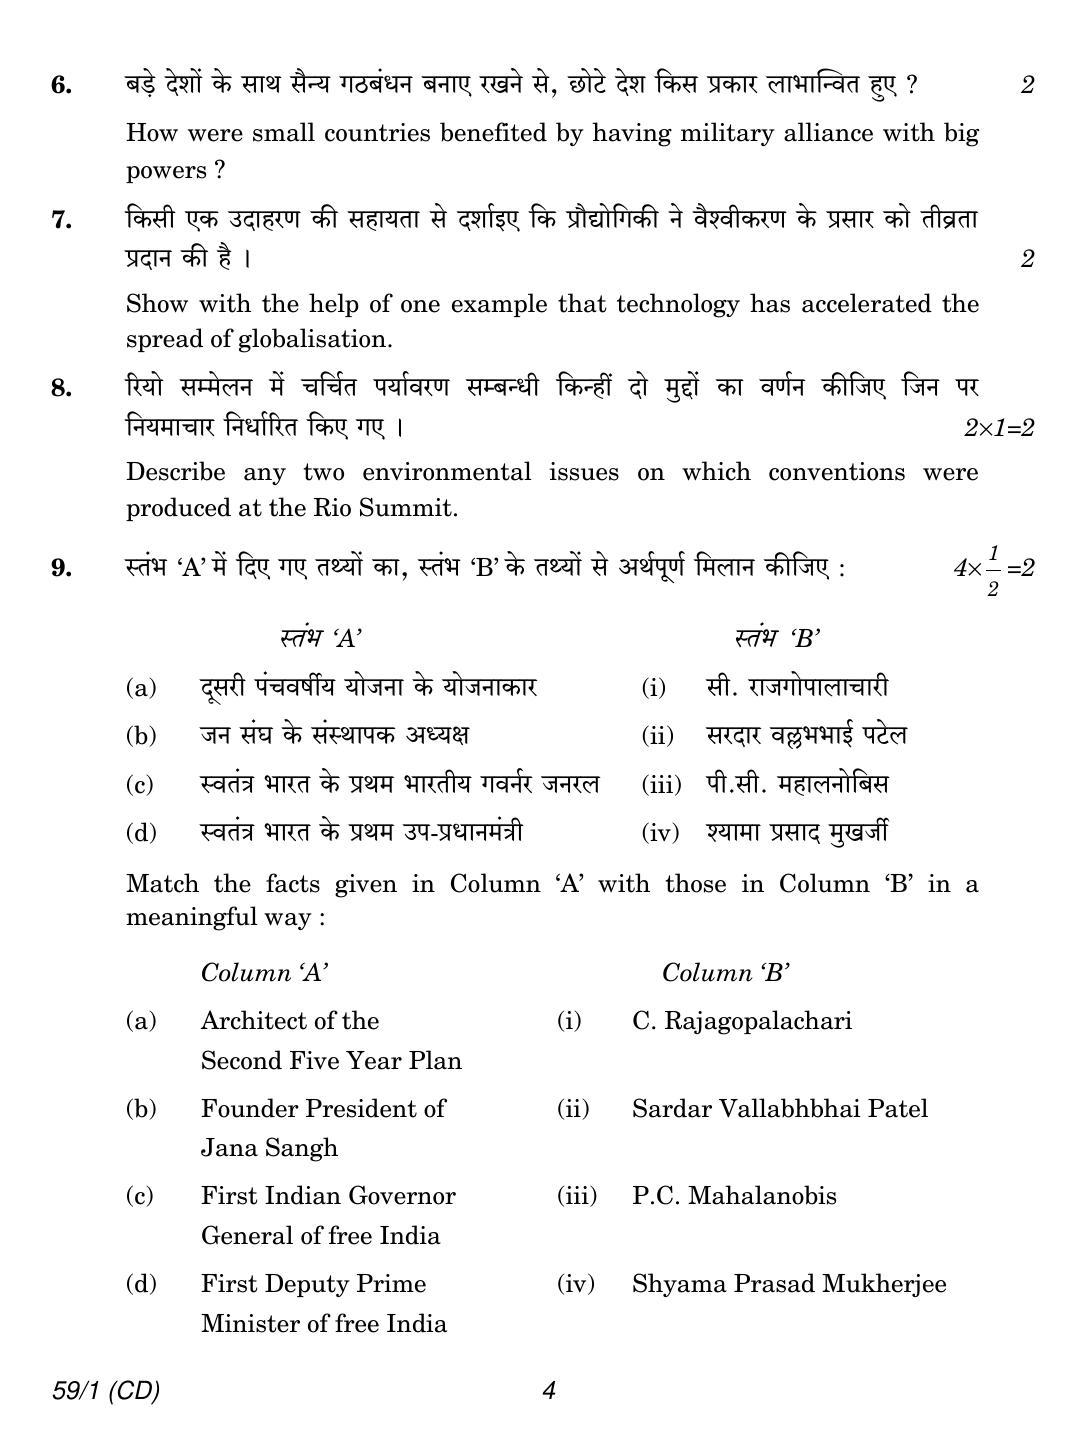 CBSE Class 12 59-1 POLITICAL SCIENCE CD 2018 Question Paper - Page 4